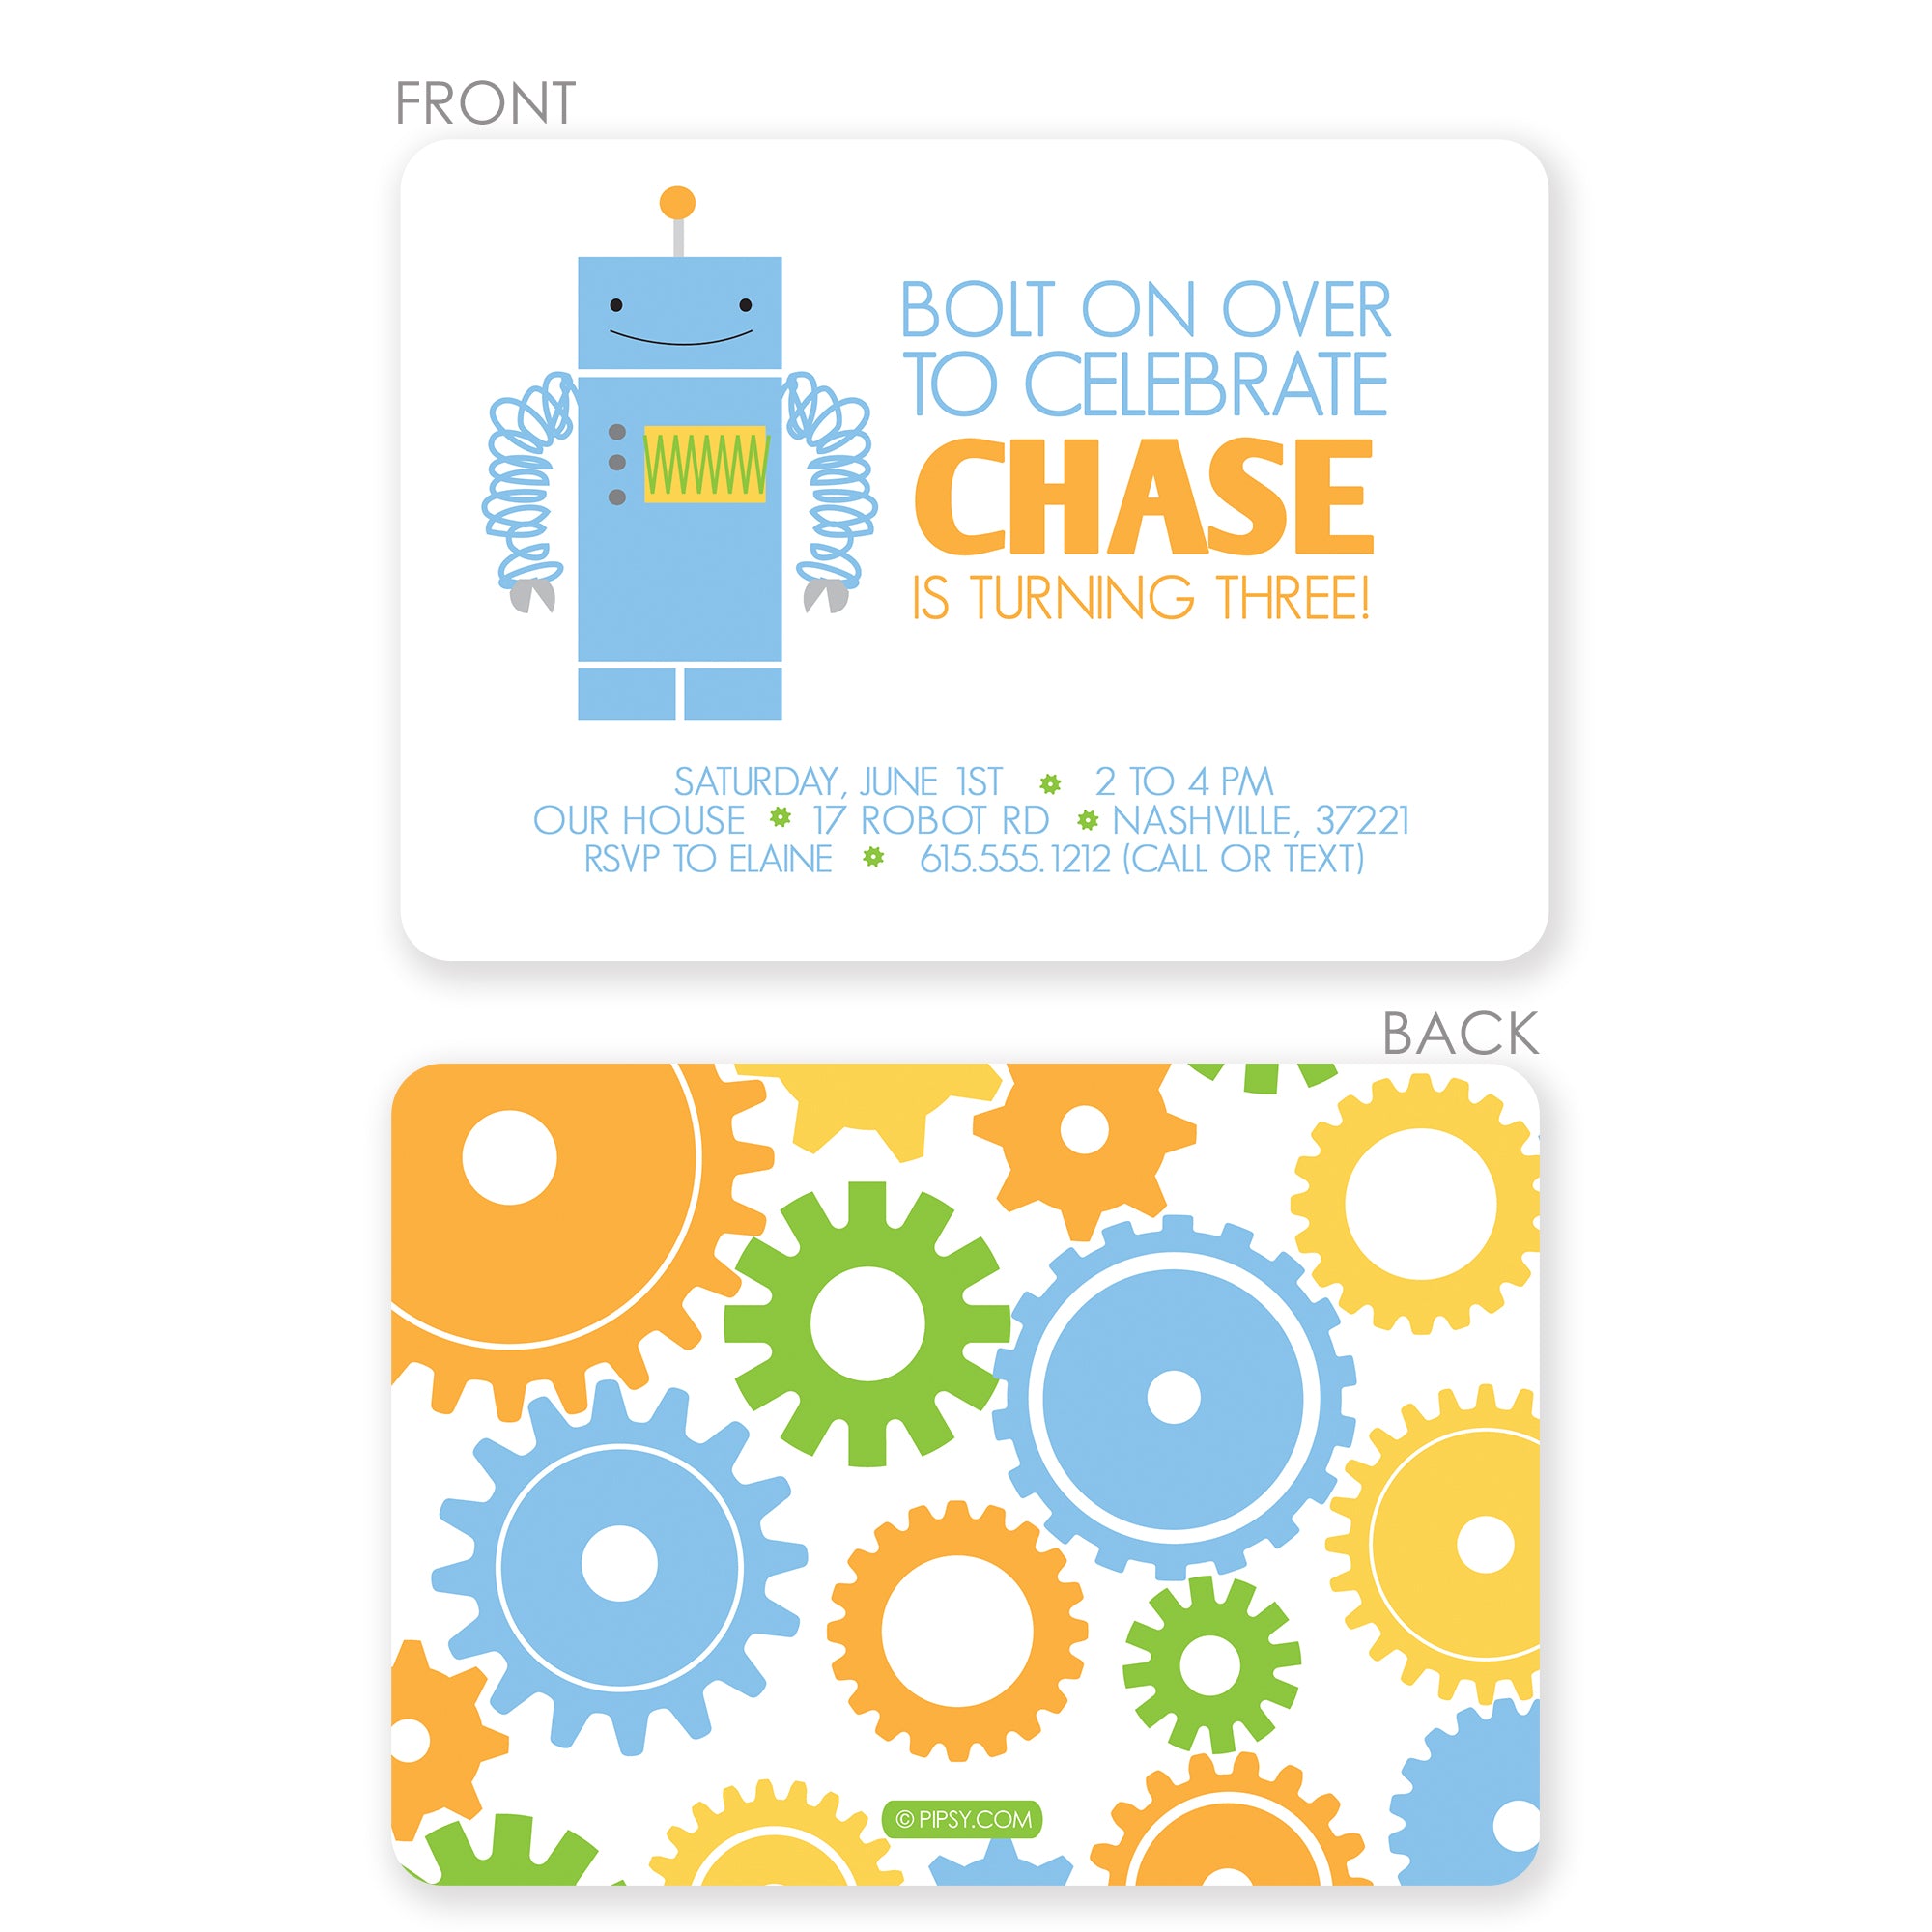 Front and back view of Robot birthday invitation with a gear pattern on the back, printed on thick cardstock with 2 sided printing, envelopes included. Can be made in any color scheme